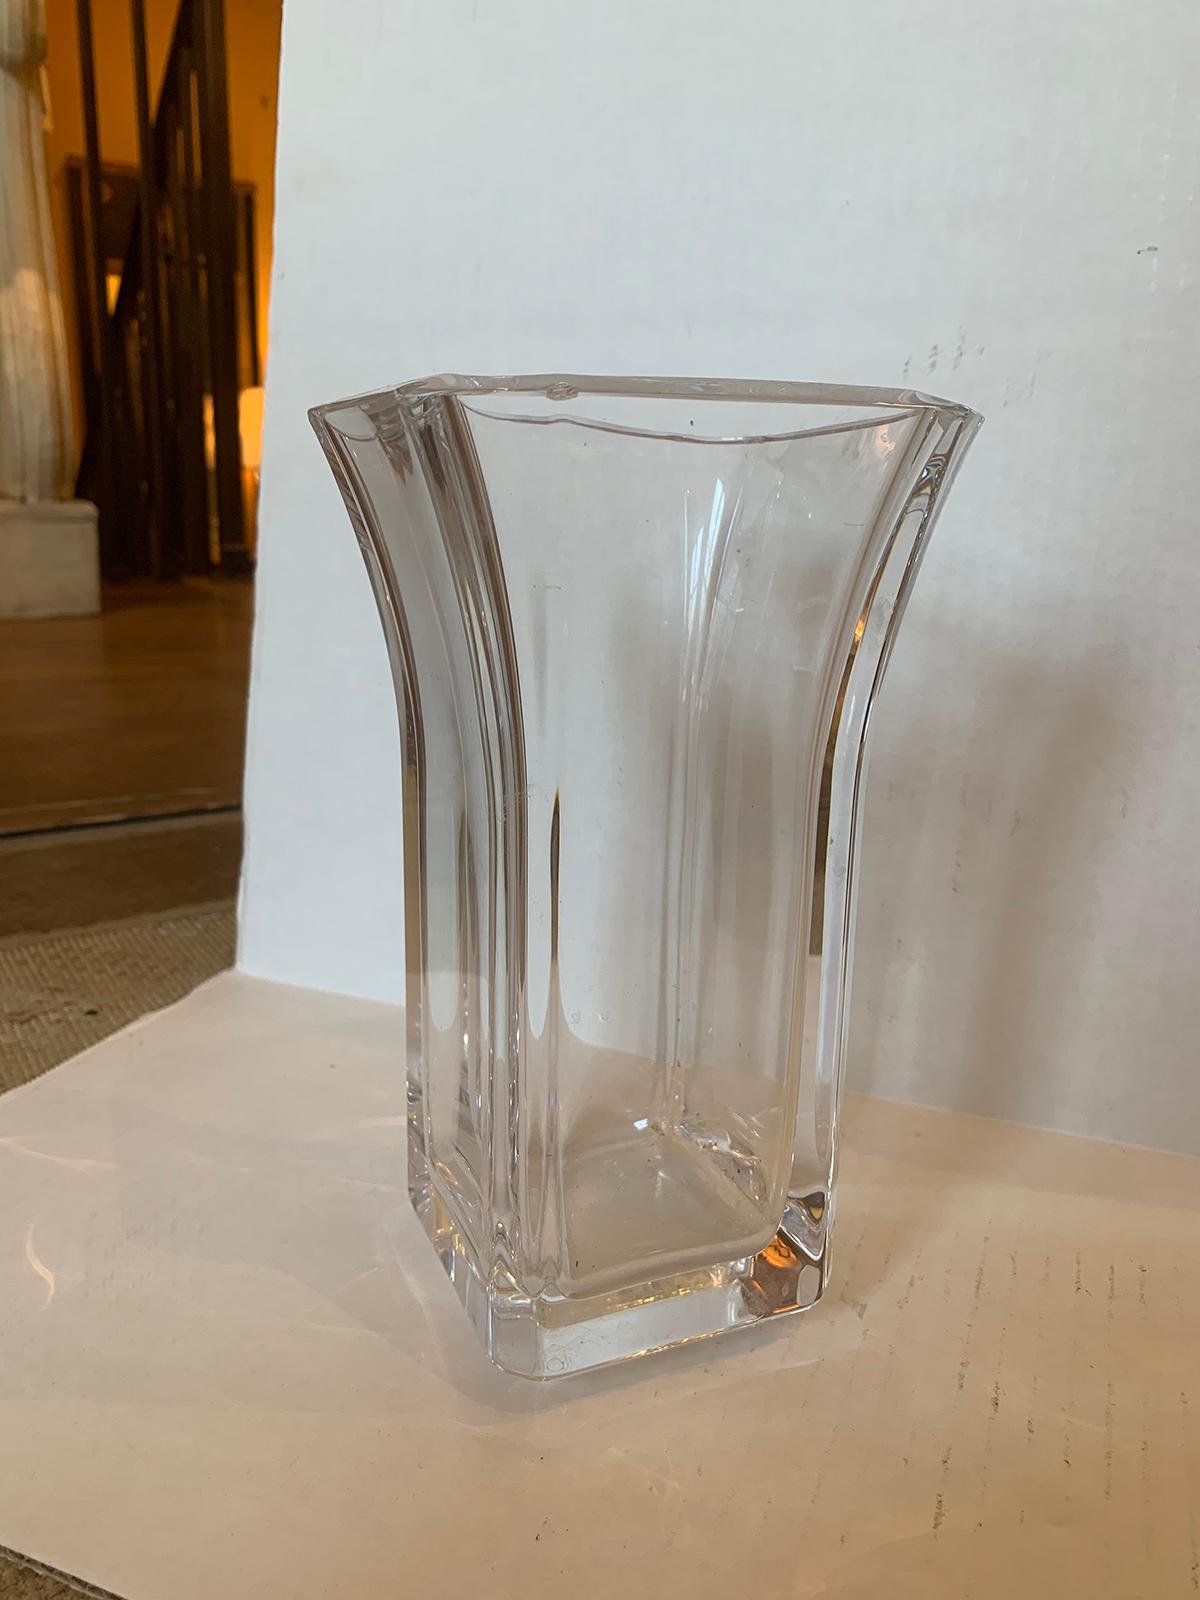 20th century square fluted crystal vase
Glass is chipped around edges - shown in photos.